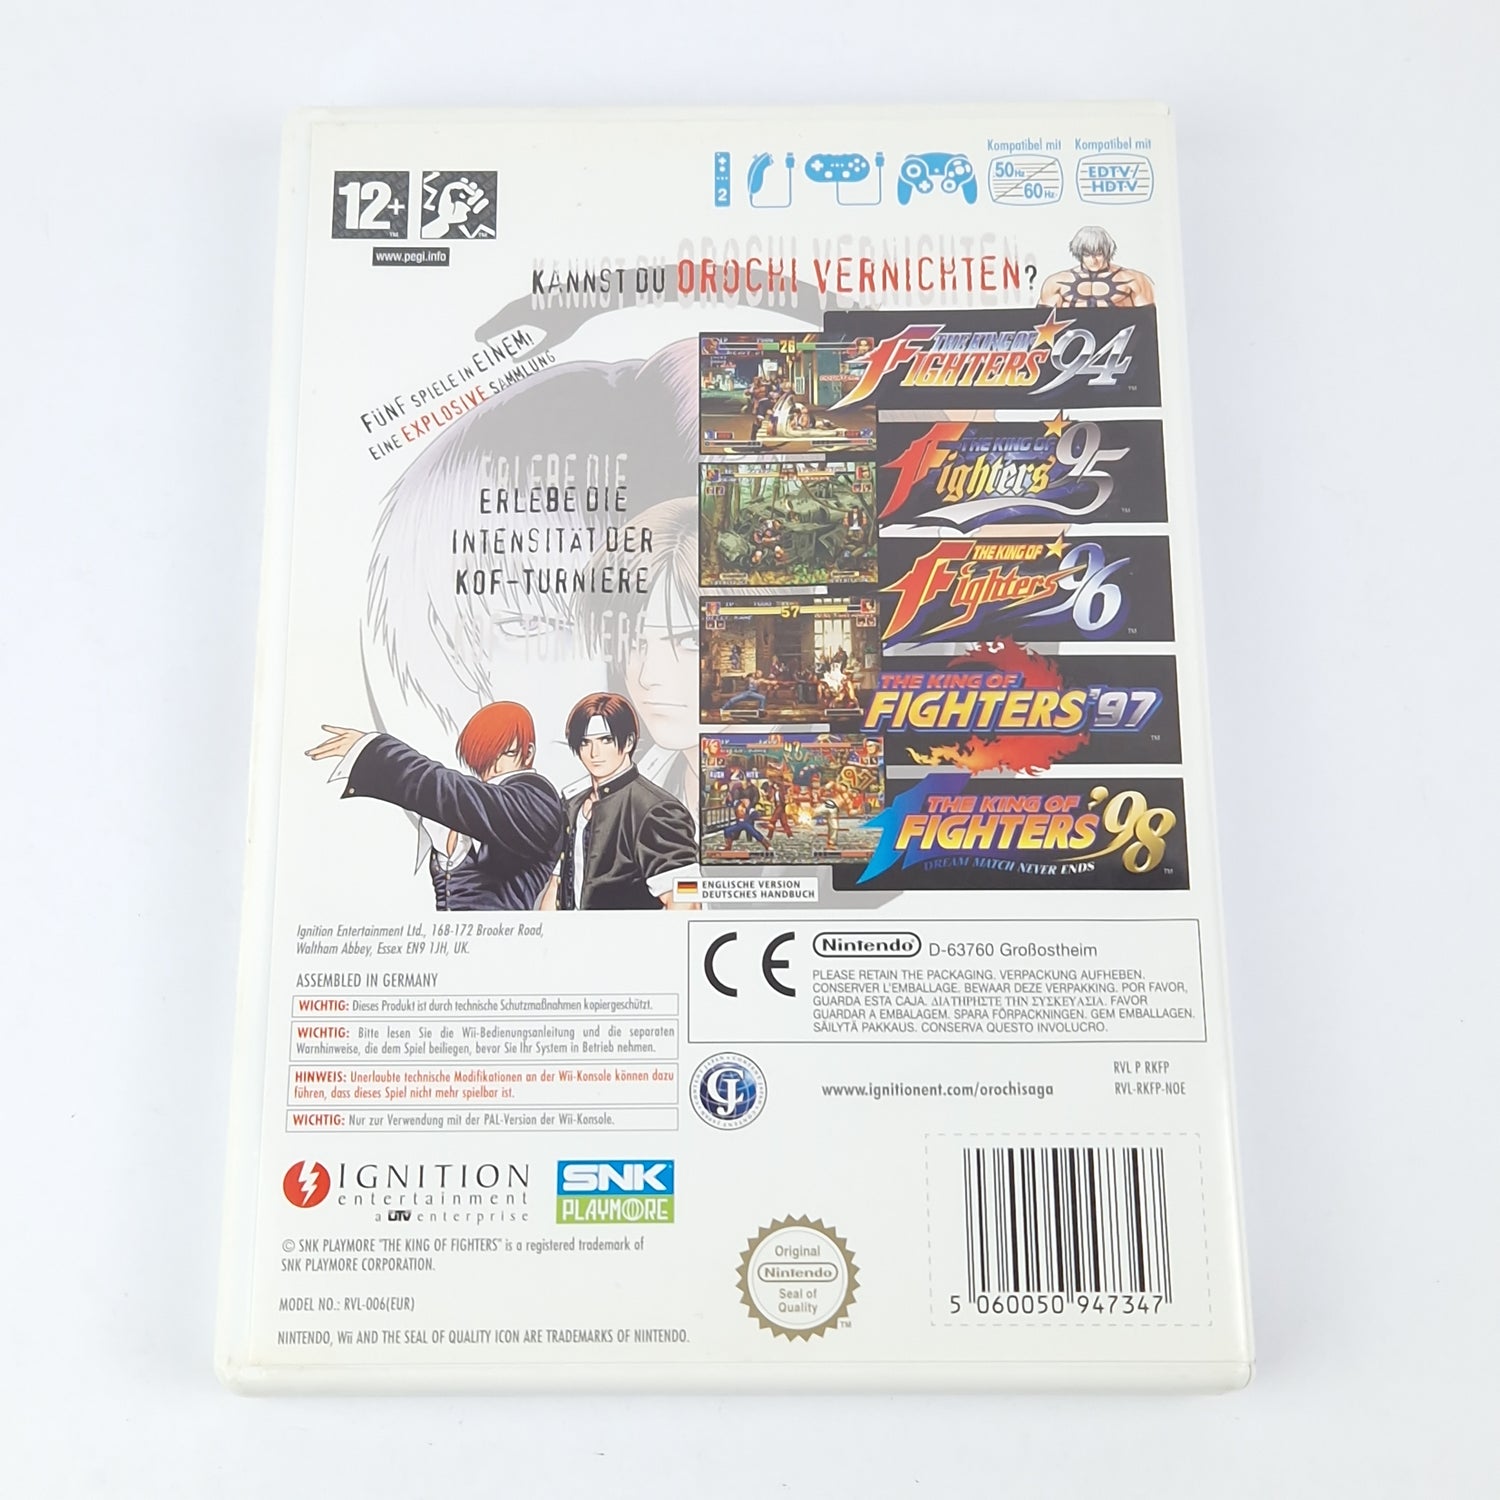 Nintendo Wii Spiel : The King of Fighters Collection The Orochi Saga - OVP